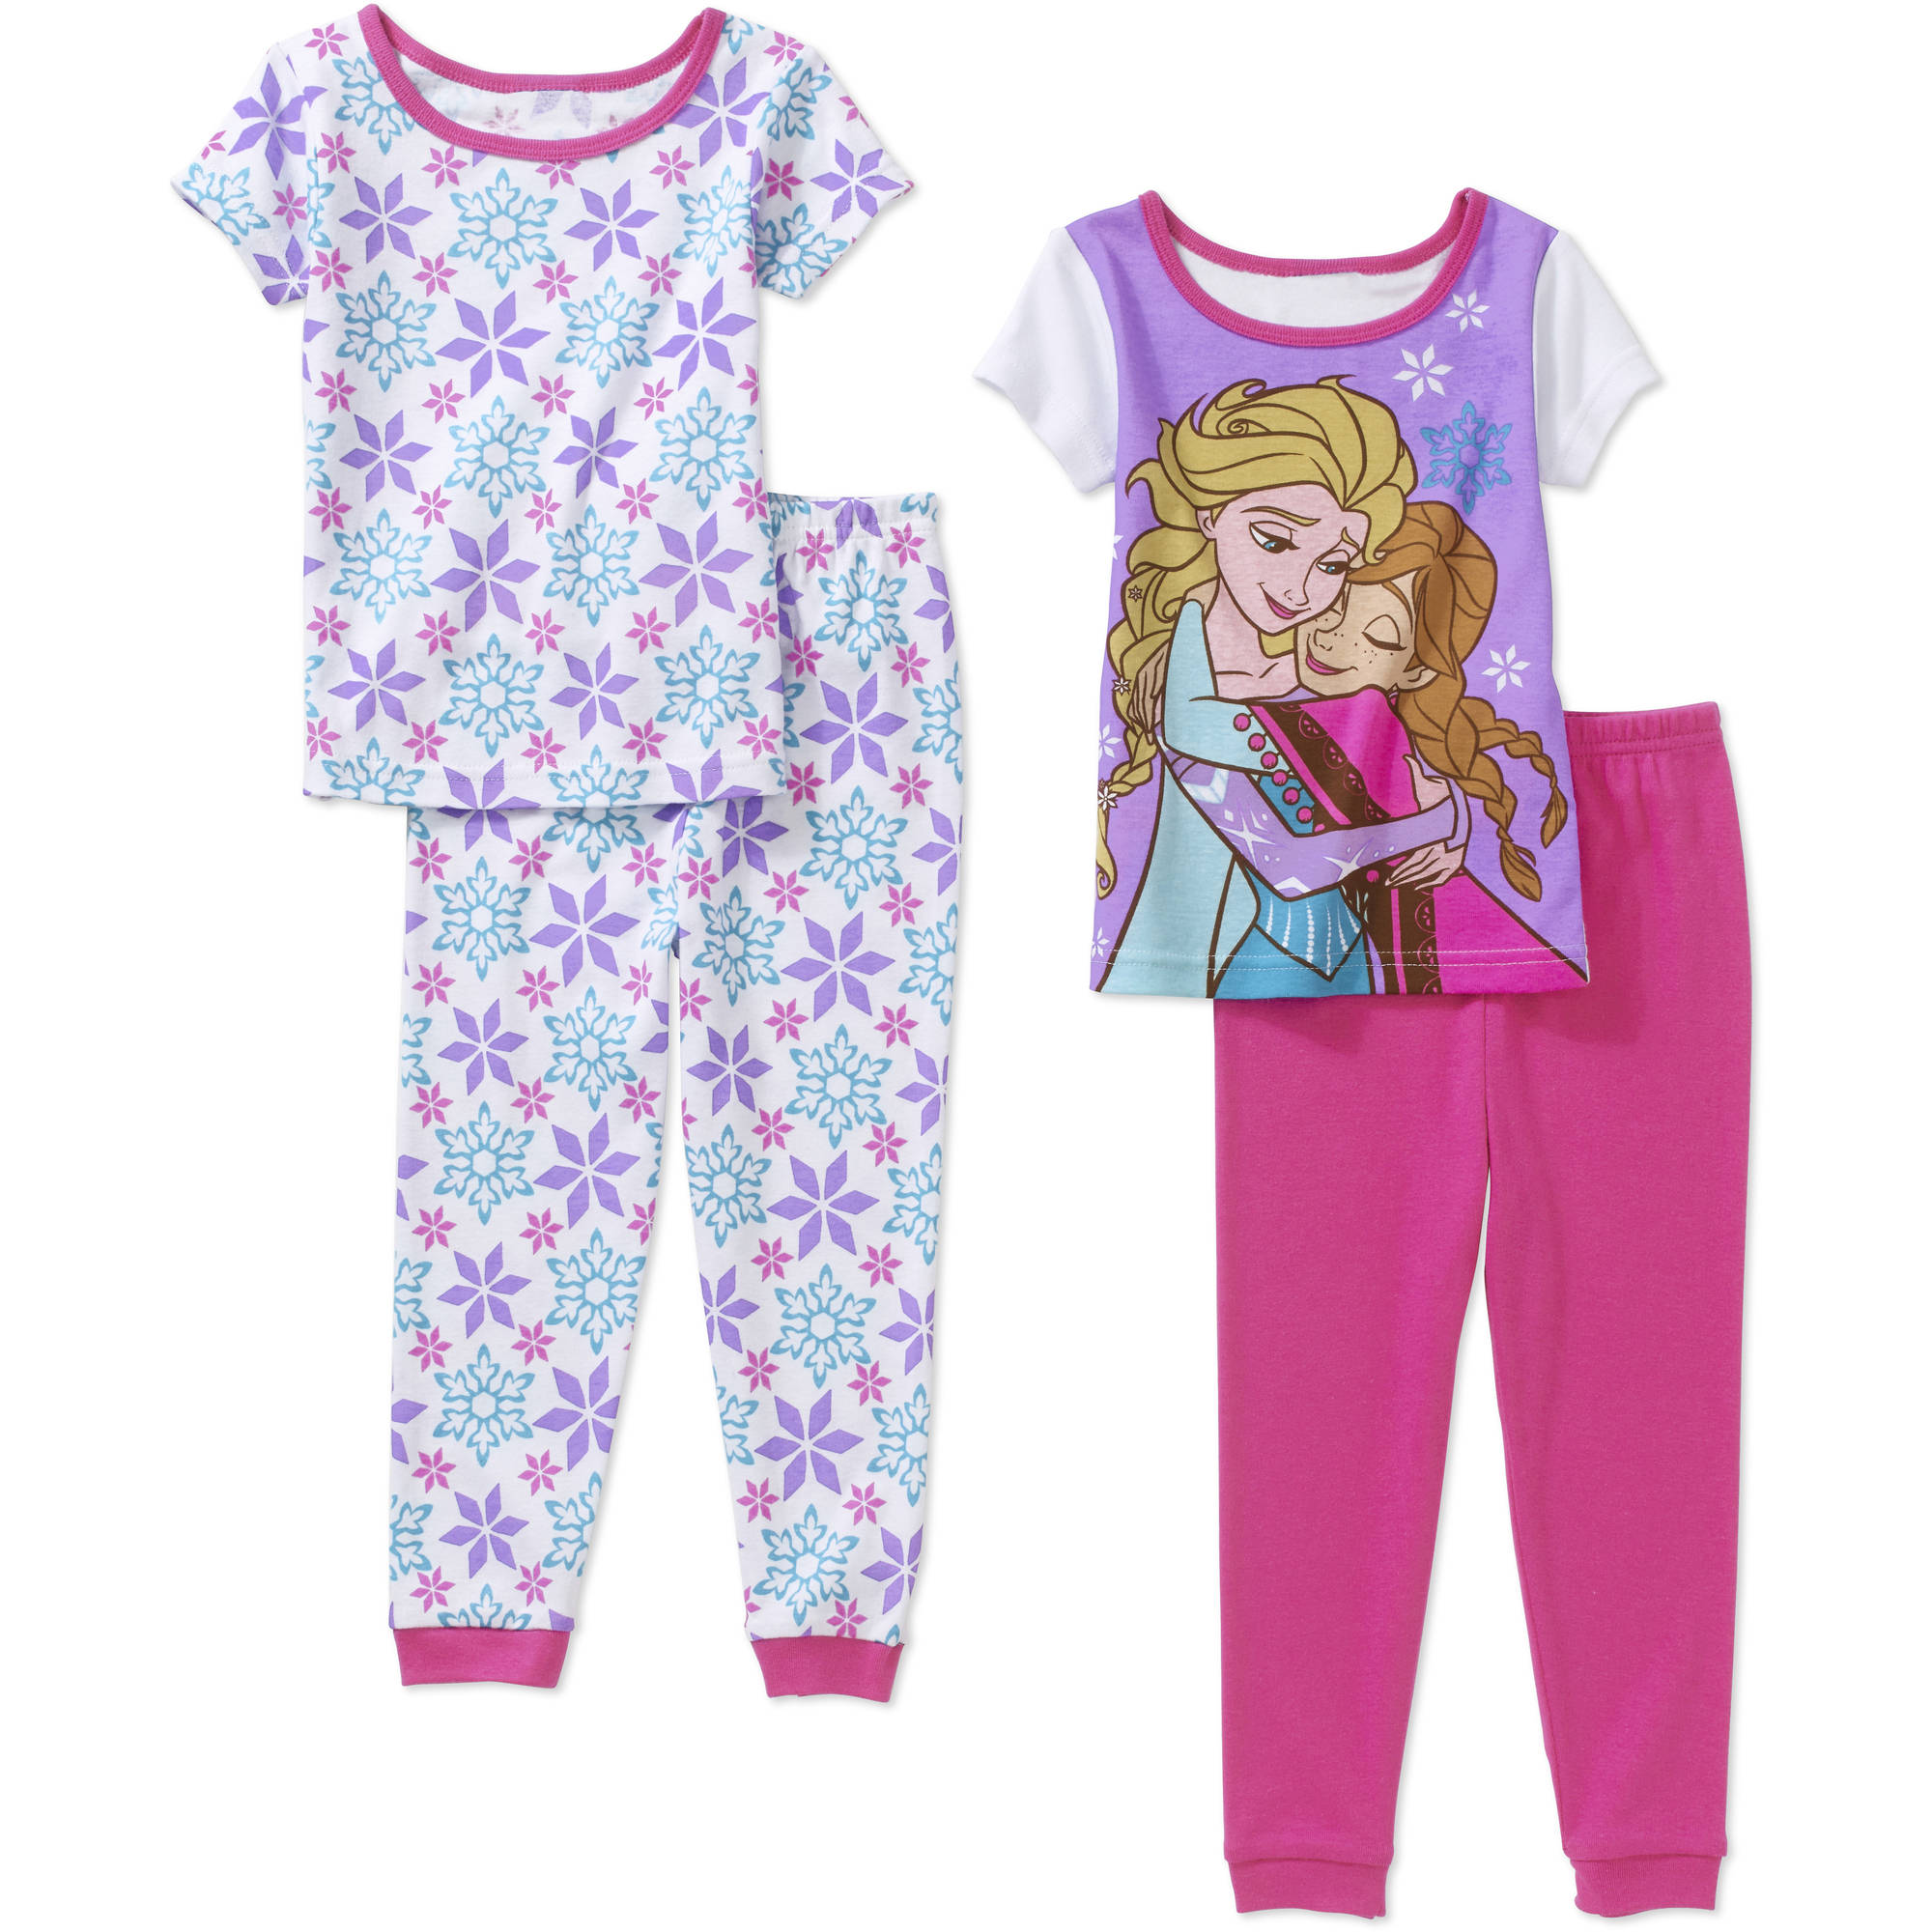 Disney Frozen Baby Toddler Girl Cotton Tight Fit Short Sleeve PJs, 2-Sets - image 1 of 1